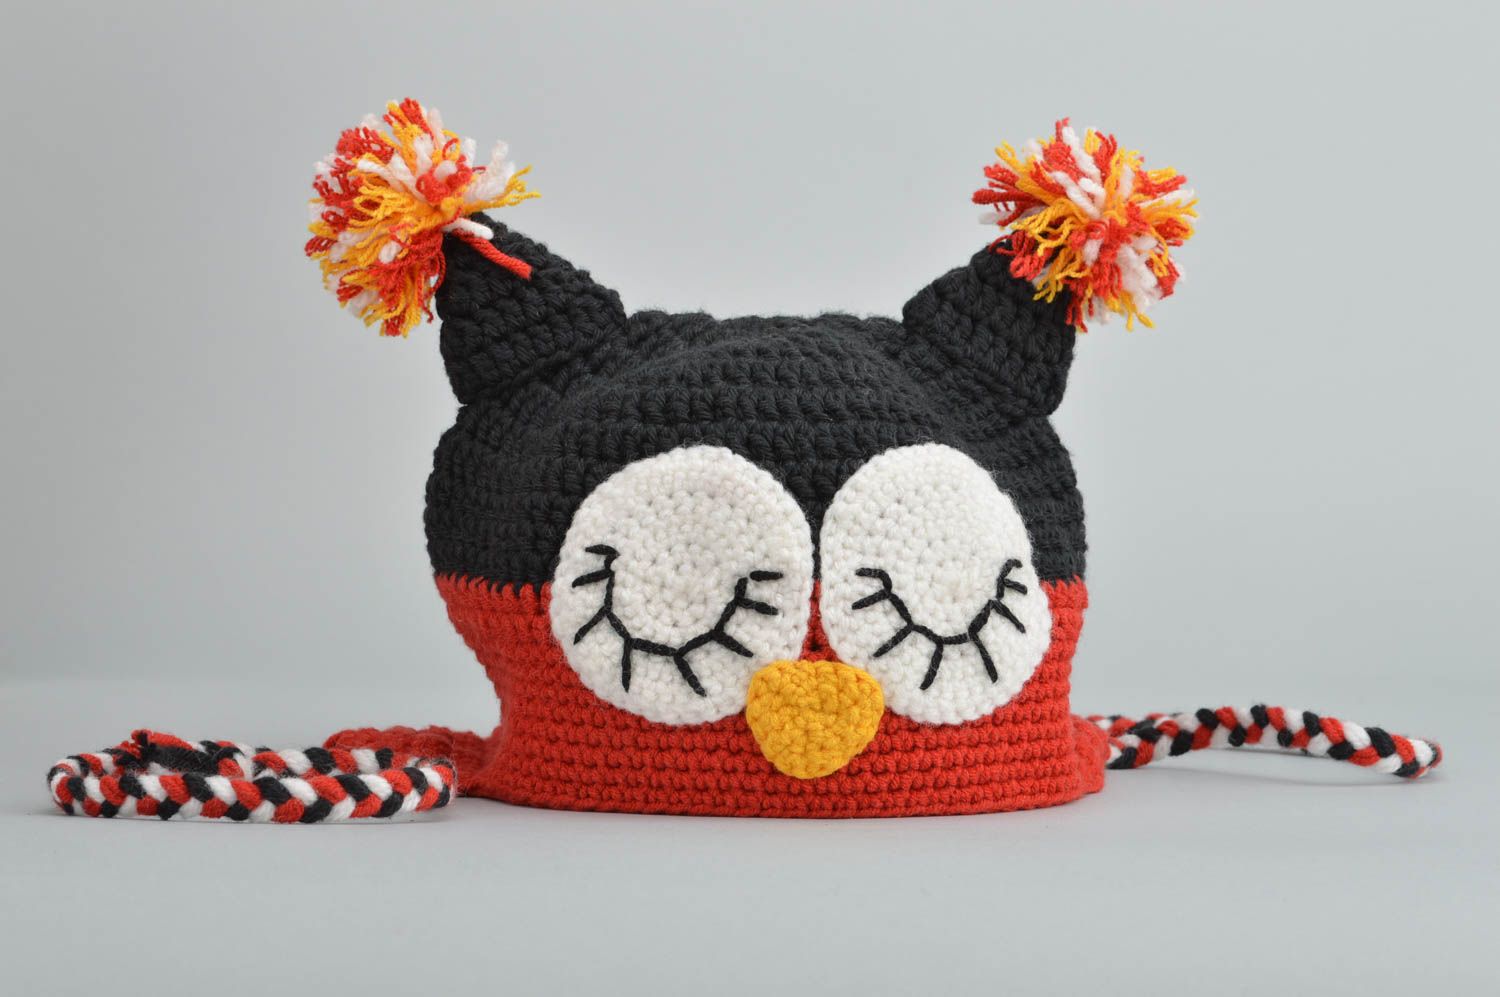 Handmade woven unusual beautiful cap in shape of owl on strings for kids photo 2